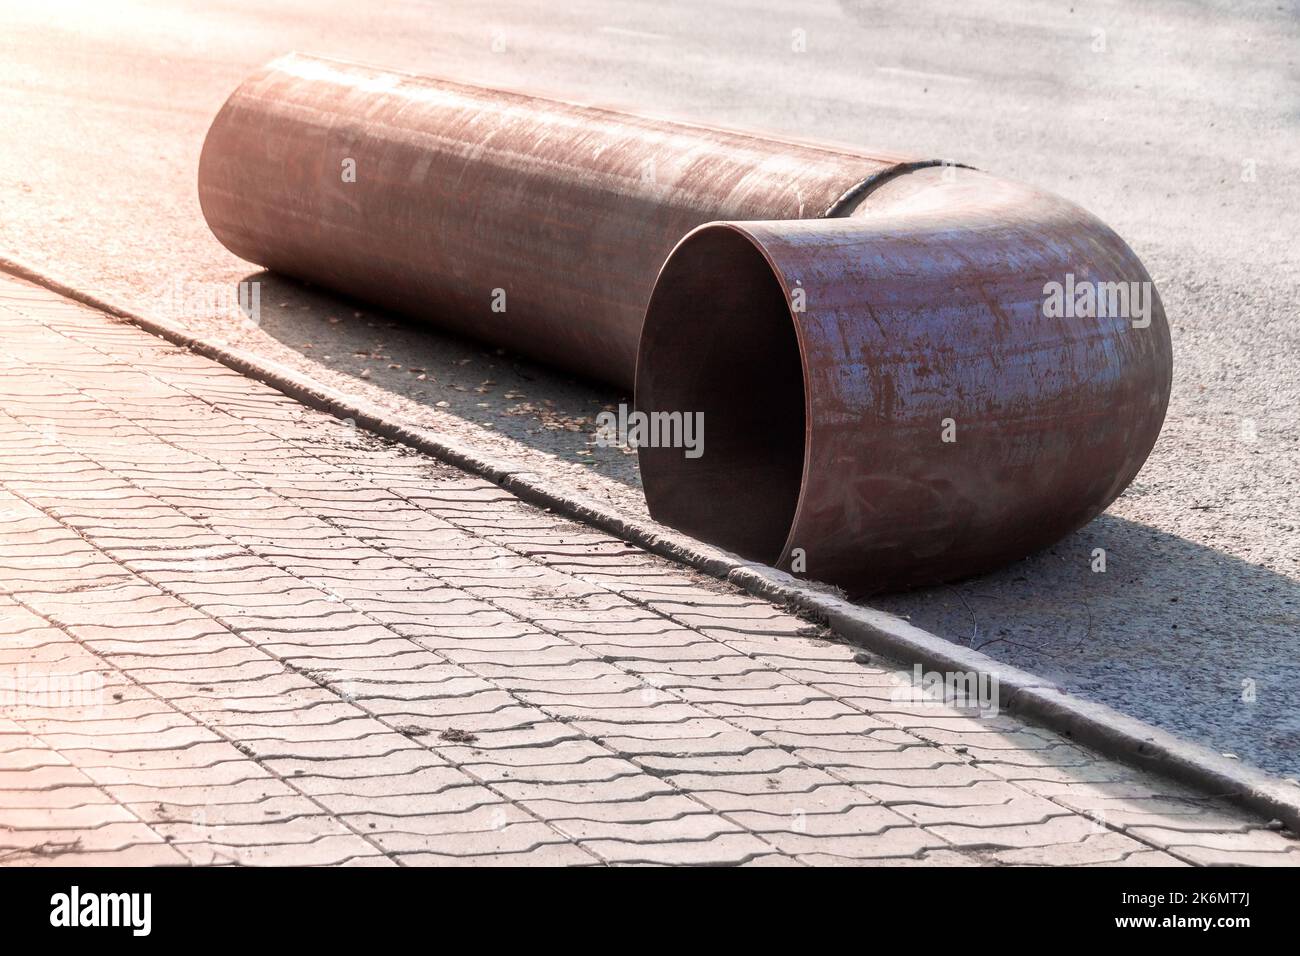 a new fitting pipe turn lies on the pavement waiting for the repair of the main pipe, selective focus Stock Photo